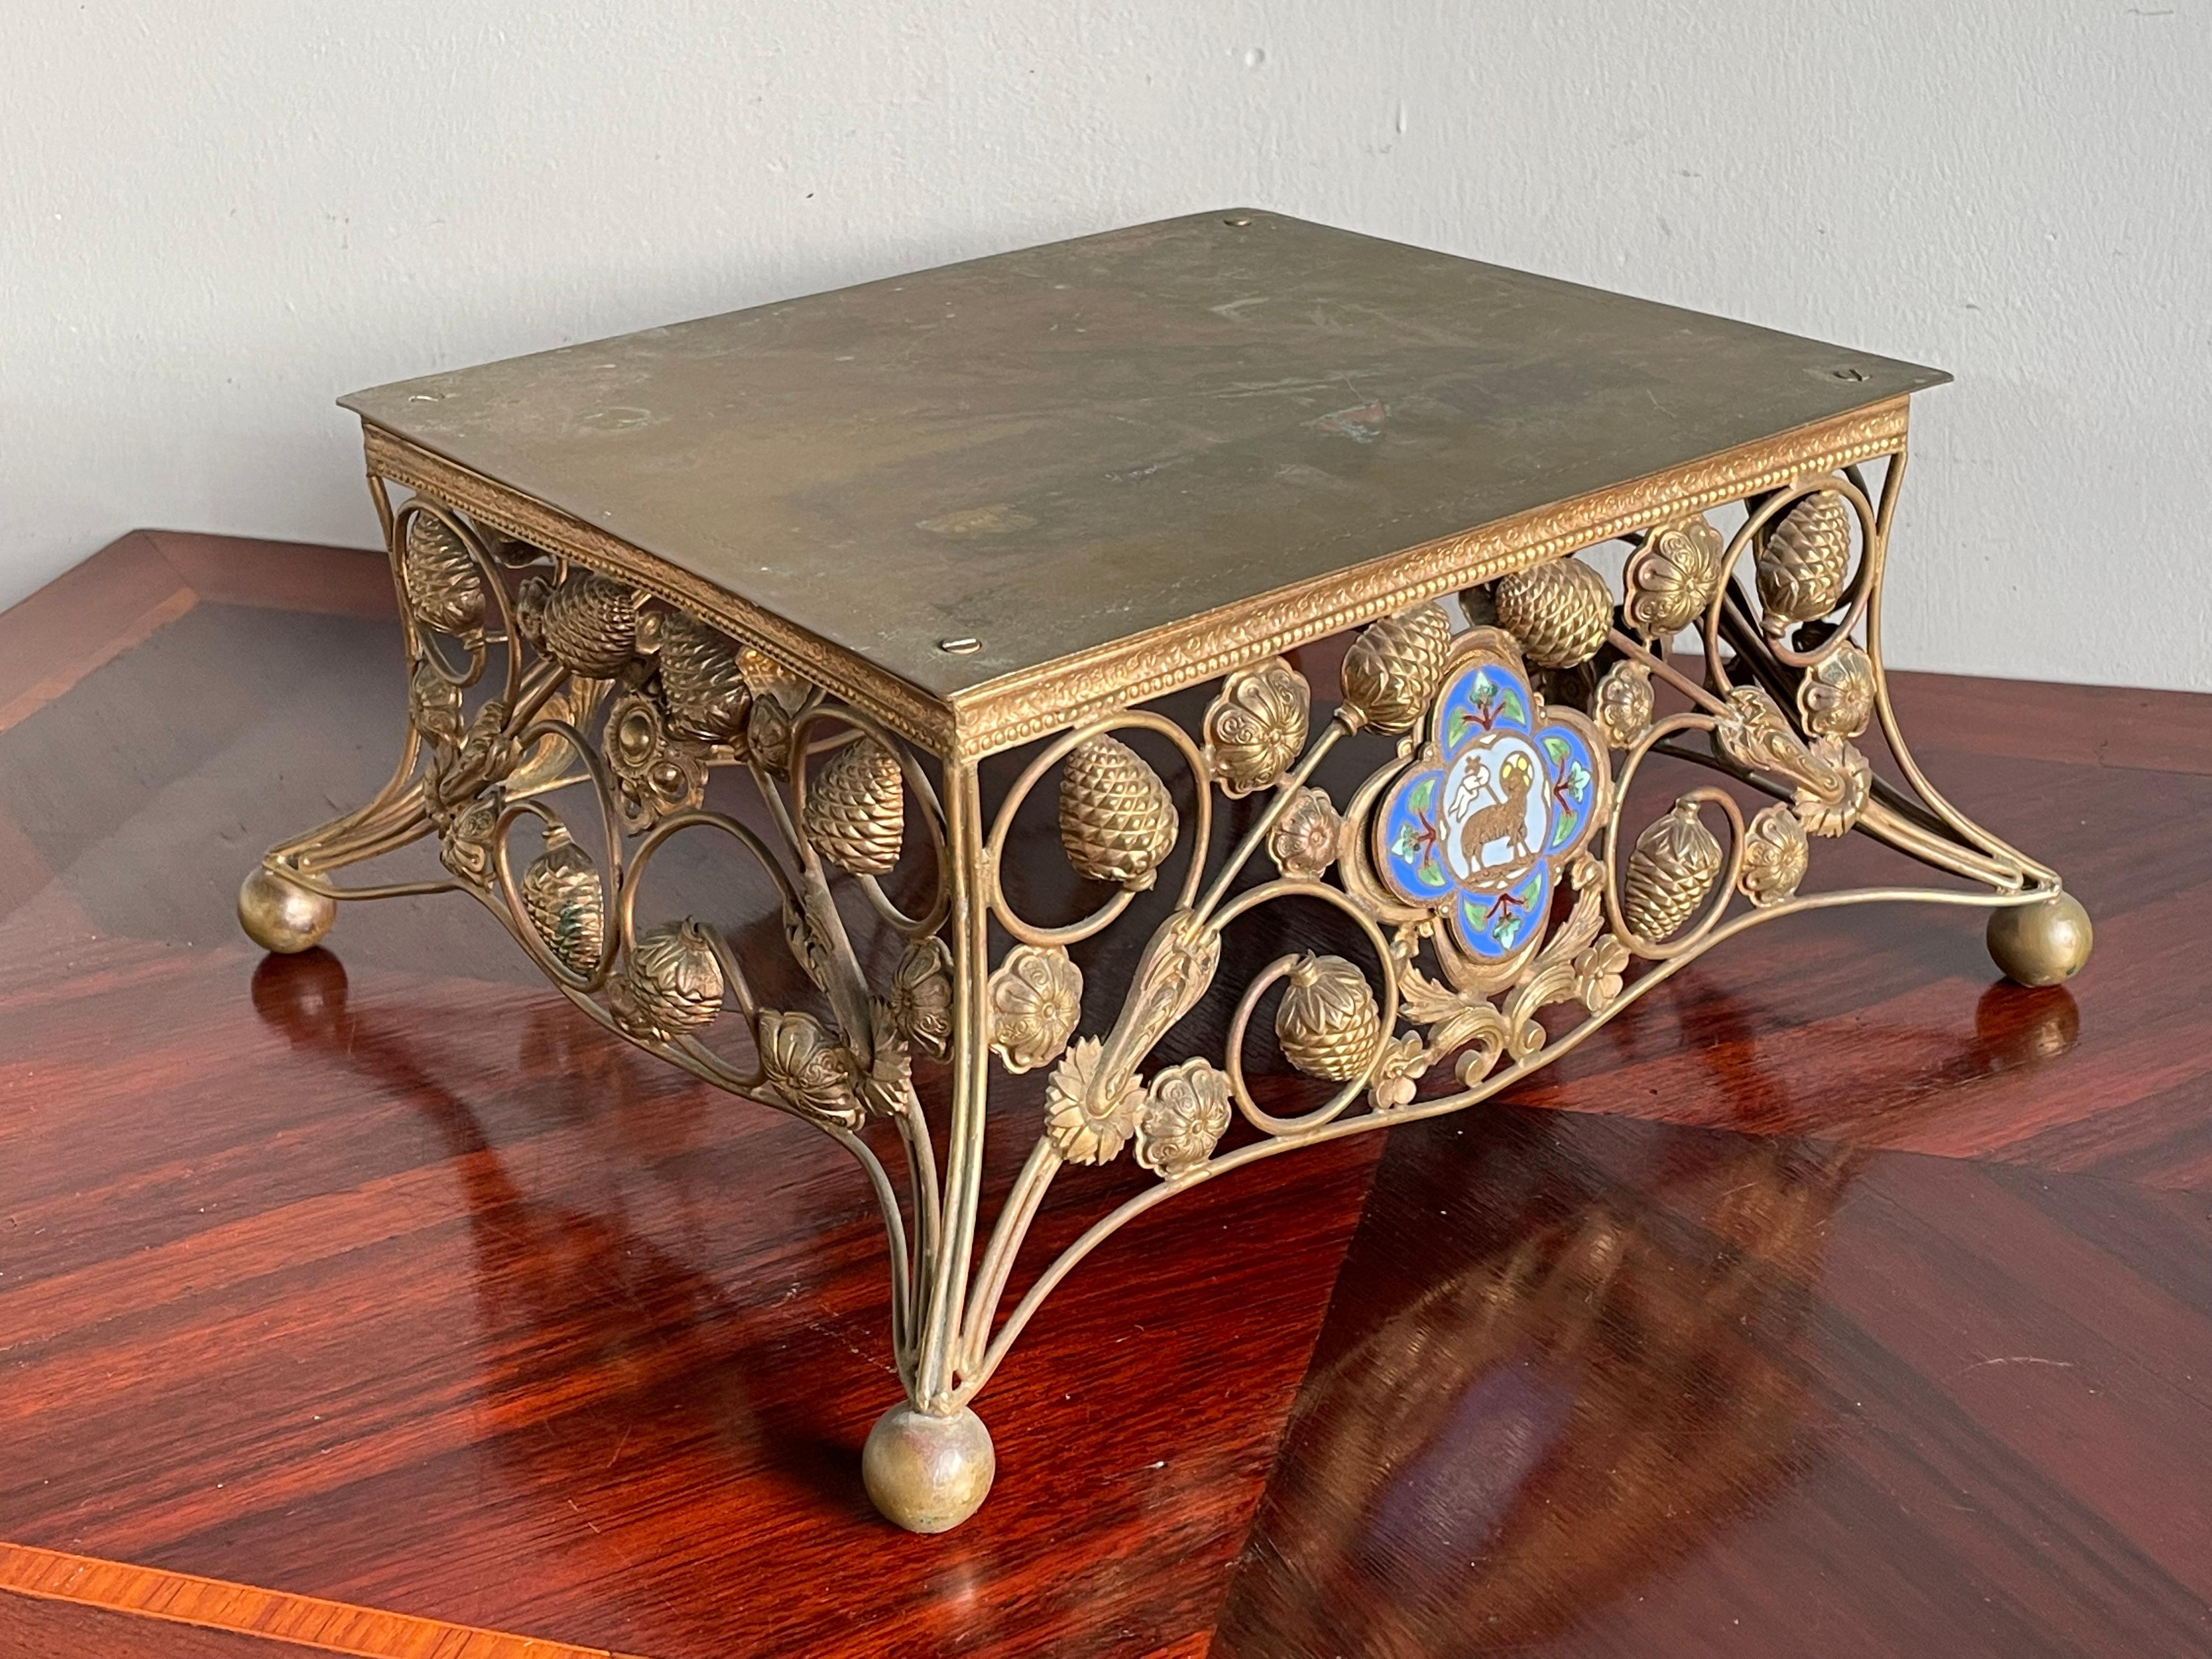 Rare 19th century Gothic church altar stand with cloisonné Agnus Dei symbol in a bronze quatrefoil.

This rare, late 1800s, brass sculpture stand has a multitude of beautiful details and it is in remarkably good condition. The stunning, open